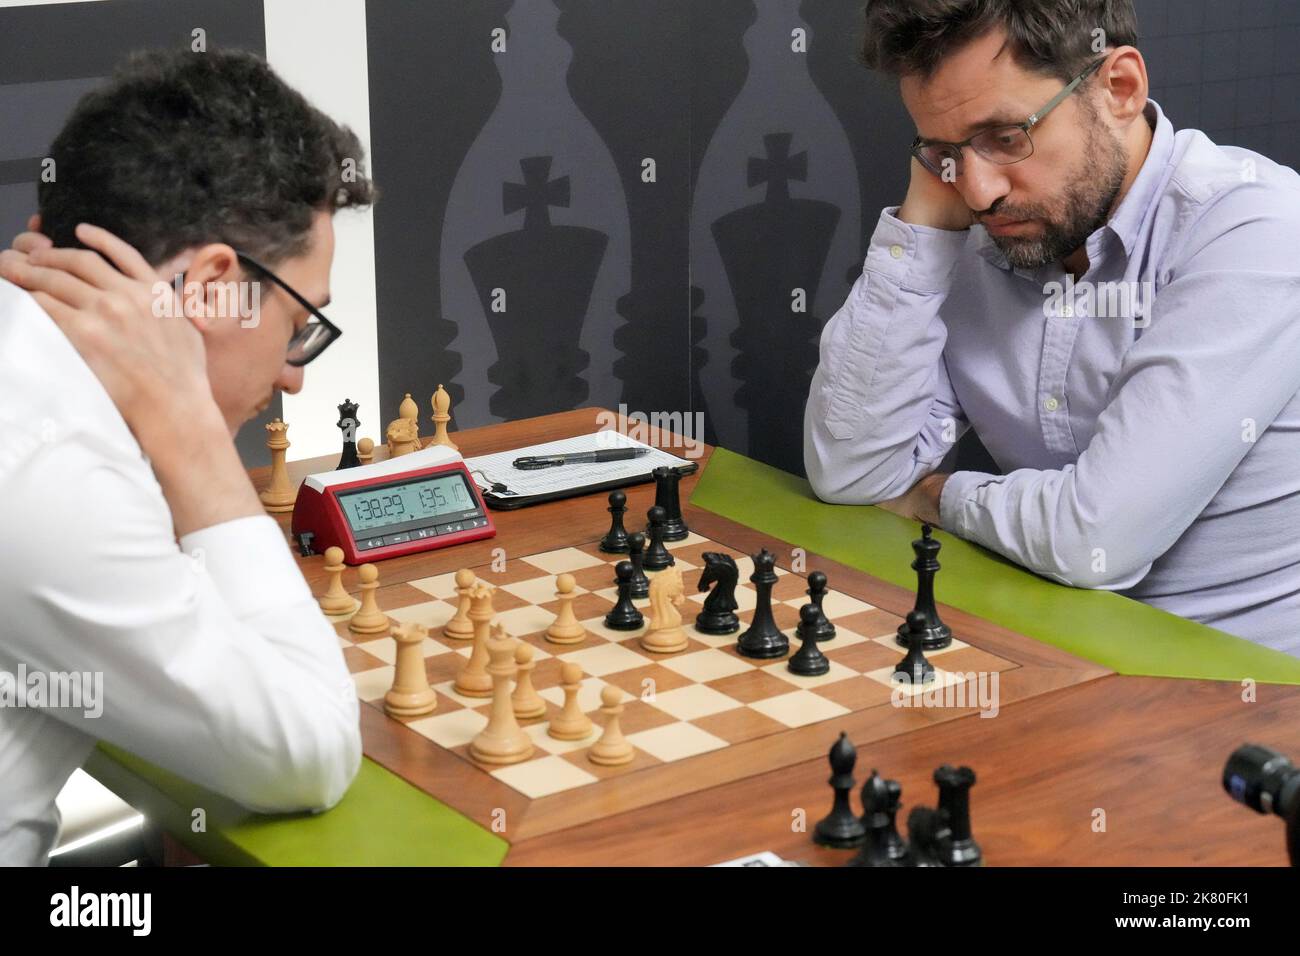 Fabiano Caruana helps usher in a new era for American chess